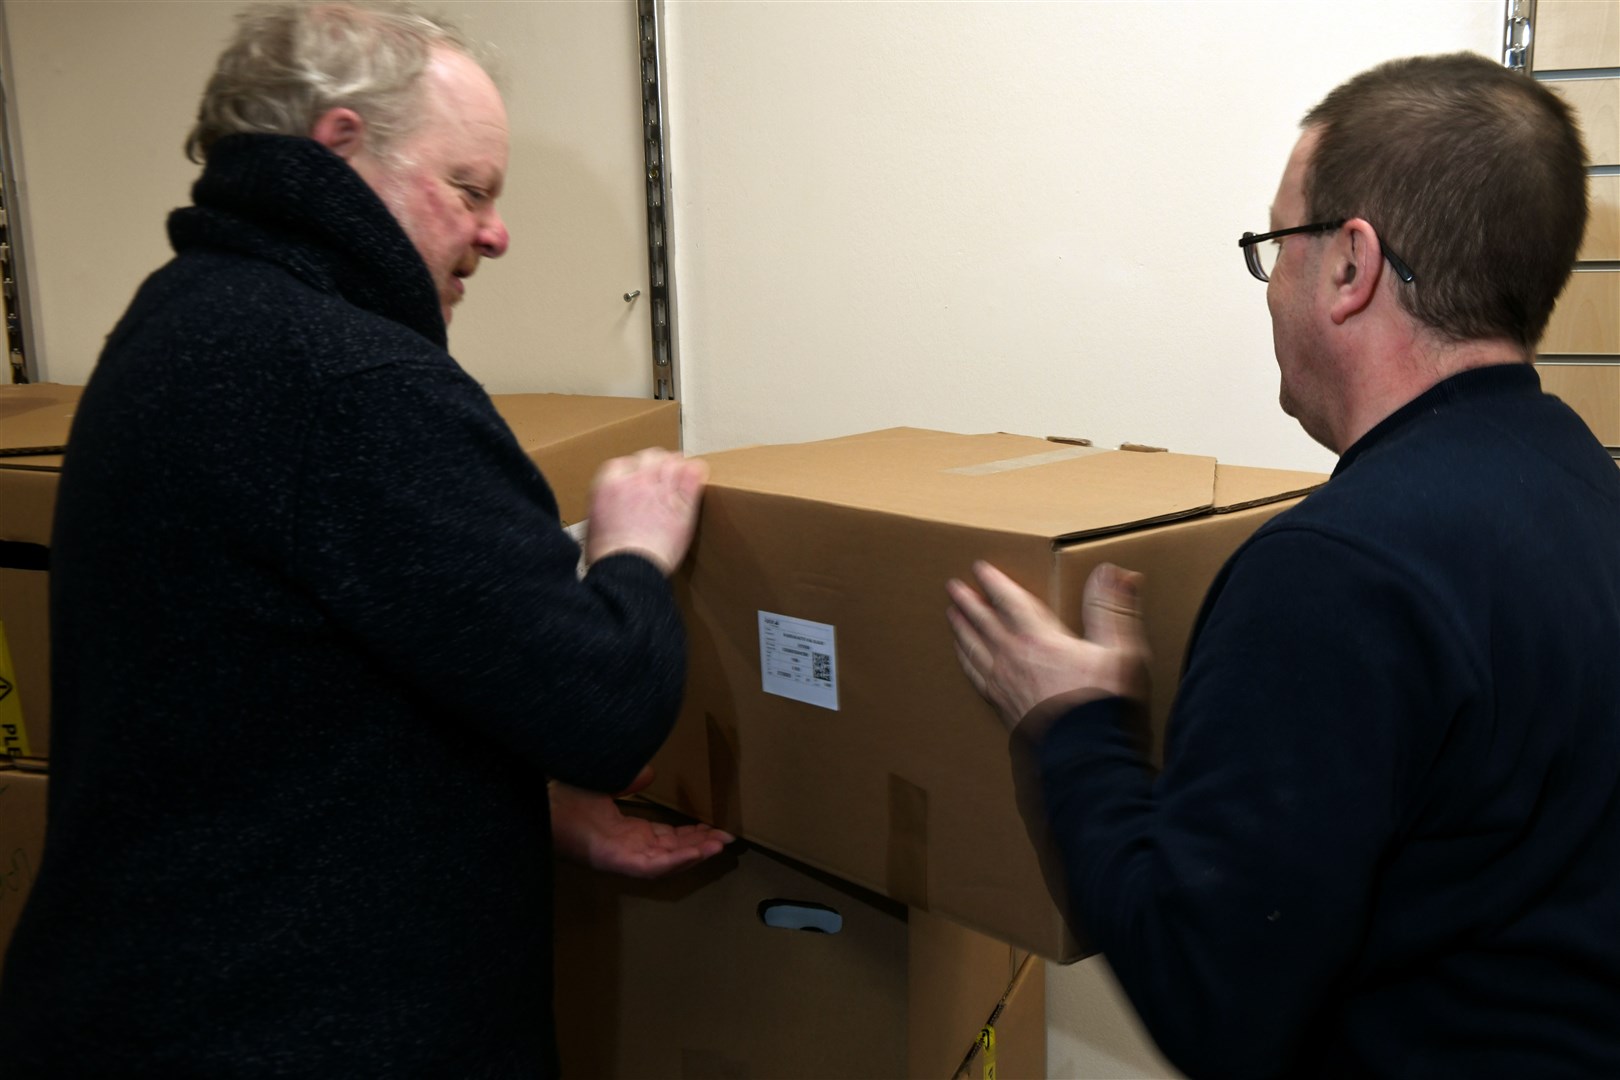 Easton Thain and Hamish Fraser packing up the boxes of stock that are to go to other charity shops.